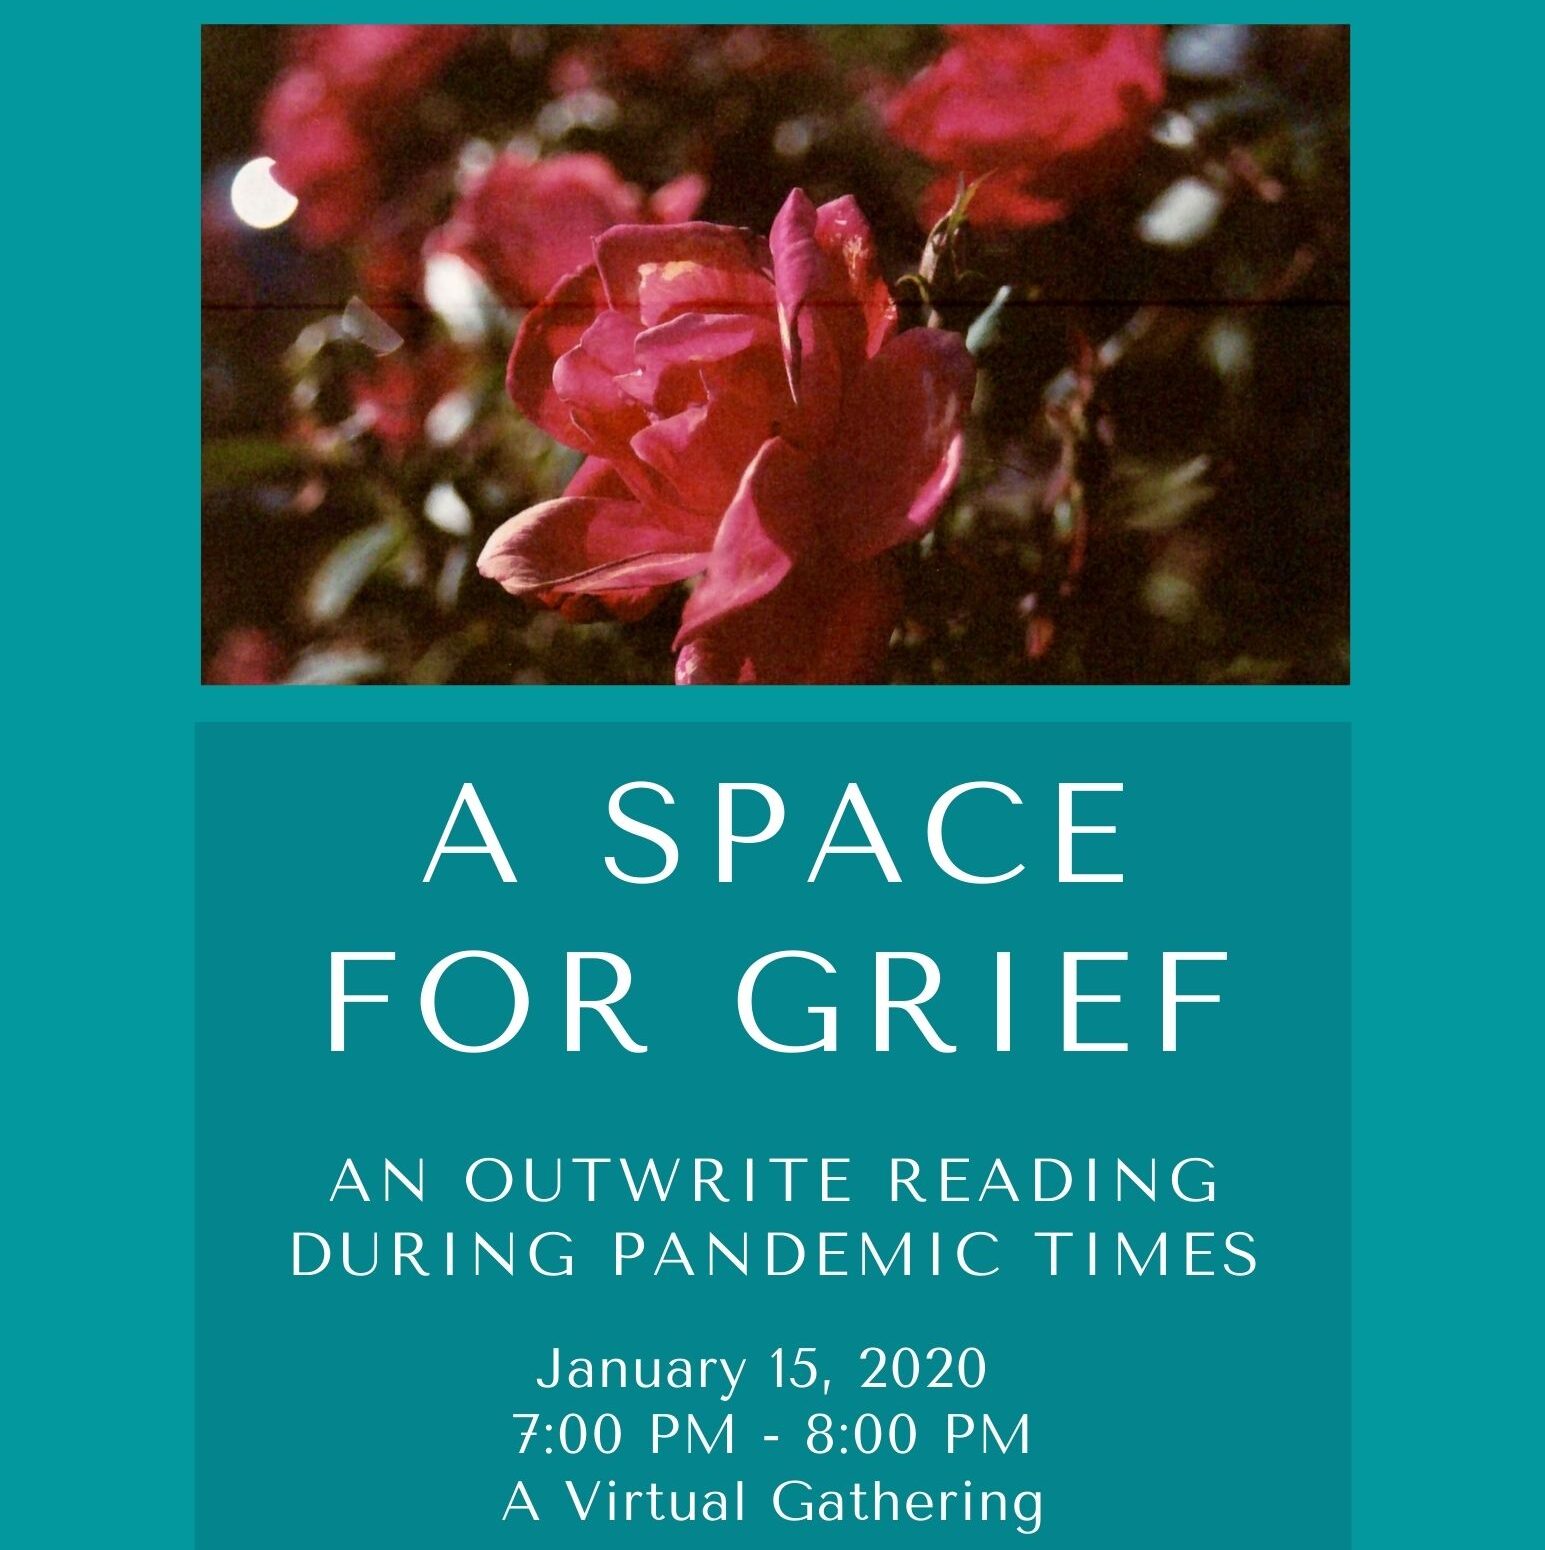 A Space for Grief: An OutWrite Reading During Pandemic Times